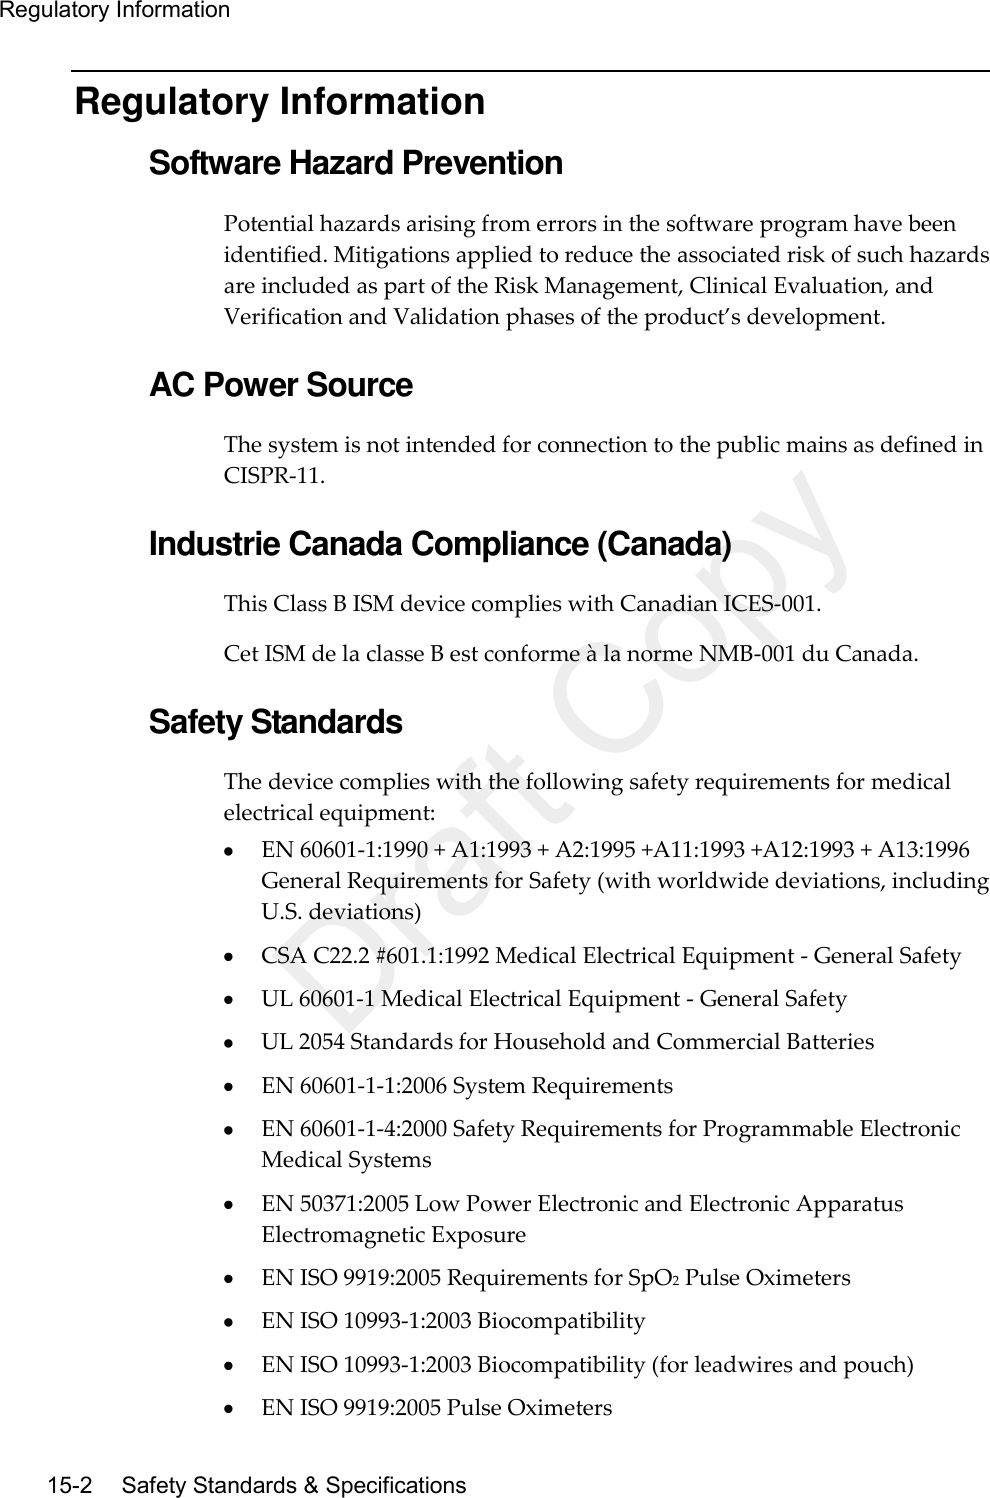 Regulatory Information  15-2   Safety Standards &amp; Specifications Regulatory Information Software Hazard Prevention Potential hazards arising from errors in the software program have been identified. Mitigations applied to reduce the associated risk of such hazards are included as part of the Risk Management, Clinical Evaluation, and Verification and Validation phases of the product’s development.  AC Power Source The system is not intended for connection to the public mains as defined in CISPR-11.  Industrie Canada Compliance (Canada) This Class B ISM device complies with Canadian ICES-001. Cet ISM de la classe B est conforme à la norme NMB-001 du Canada.  Safety Standards The device complies with the following safety requirements for medical electrical equipment:  EN 60601-1:1990 + A1:1993 + A2:1995 +A11:1993 +A12:1993 + A13:1996 General Requirements for Safety (with worldwide deviations, including U.S. deviations)  CSA C22.2 #601.1:1992 Medical Electrical Equipment - General Safety  UL 60601-1 Medical Electrical Equipment - General Safety  UL 2054 Standards for Household and Commercial Batteries  EN 60601-1-1:2006 System Requirements  EN 60601-1-4:2000 Safety Requirements for Programmable Electronic Medical Systems  EN 50371:2005 Low Power Electronic and Electronic Apparatus Electromagnetic Exposure  EN ISO 9919:2005 Requirements for SpO2 Pulse Oximeters  EN ISO 10993-1:2003 Biocompatibility  EN ISO 10993-1:2003 Biocompatibility (for leadwires and pouch)  EN ISO 9919:2005 Pulse Oximeters Draft Copy